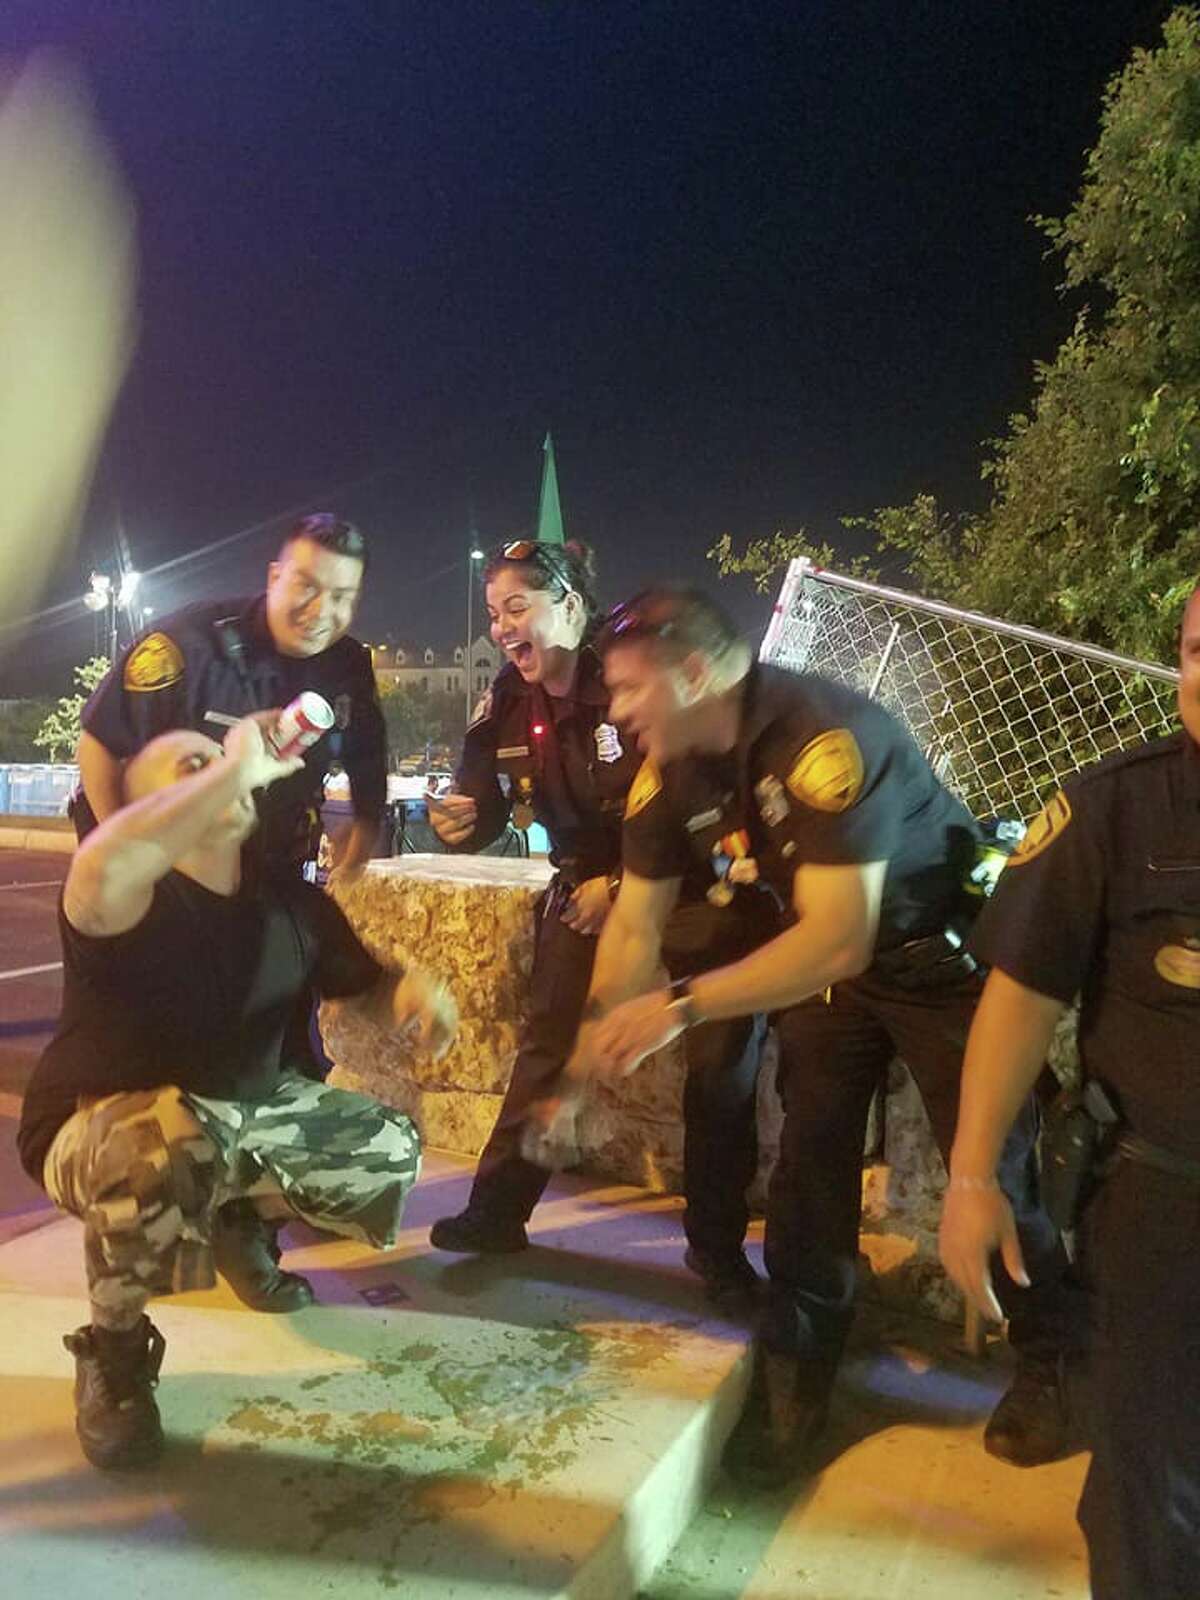 Facebook user Flawz Don Rodriguez snapped a picture of his friend Jose Garza chugging a beer while surrounded by laughing SAPD officers on Saturday.